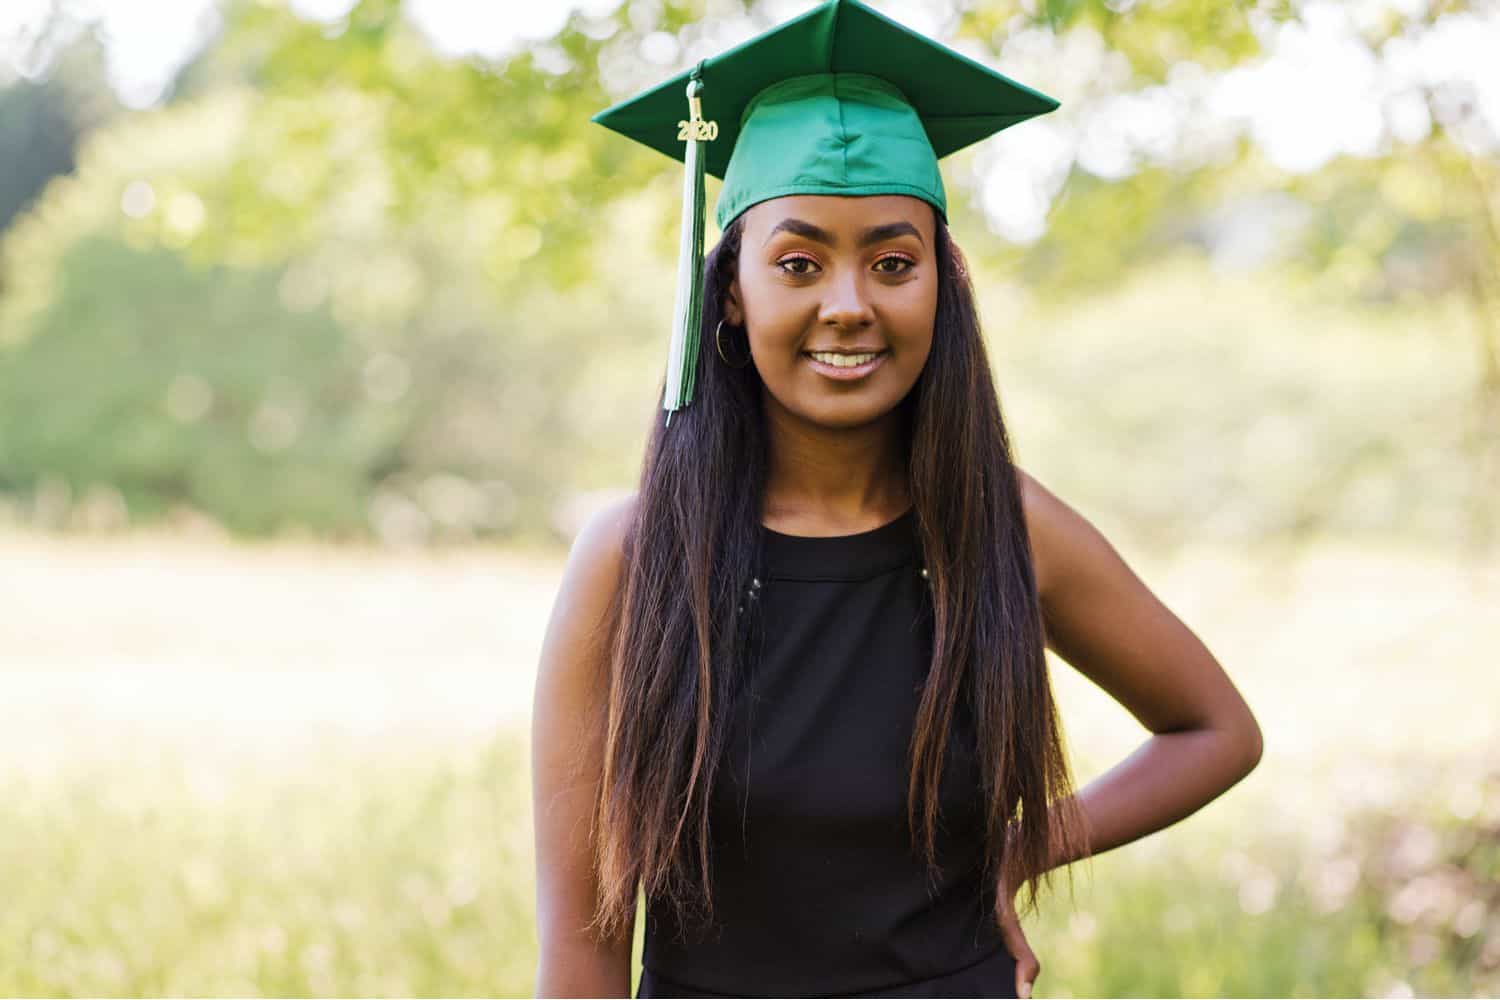 A high school senior girl poses in a field wearing a black dress and a green graduation cap